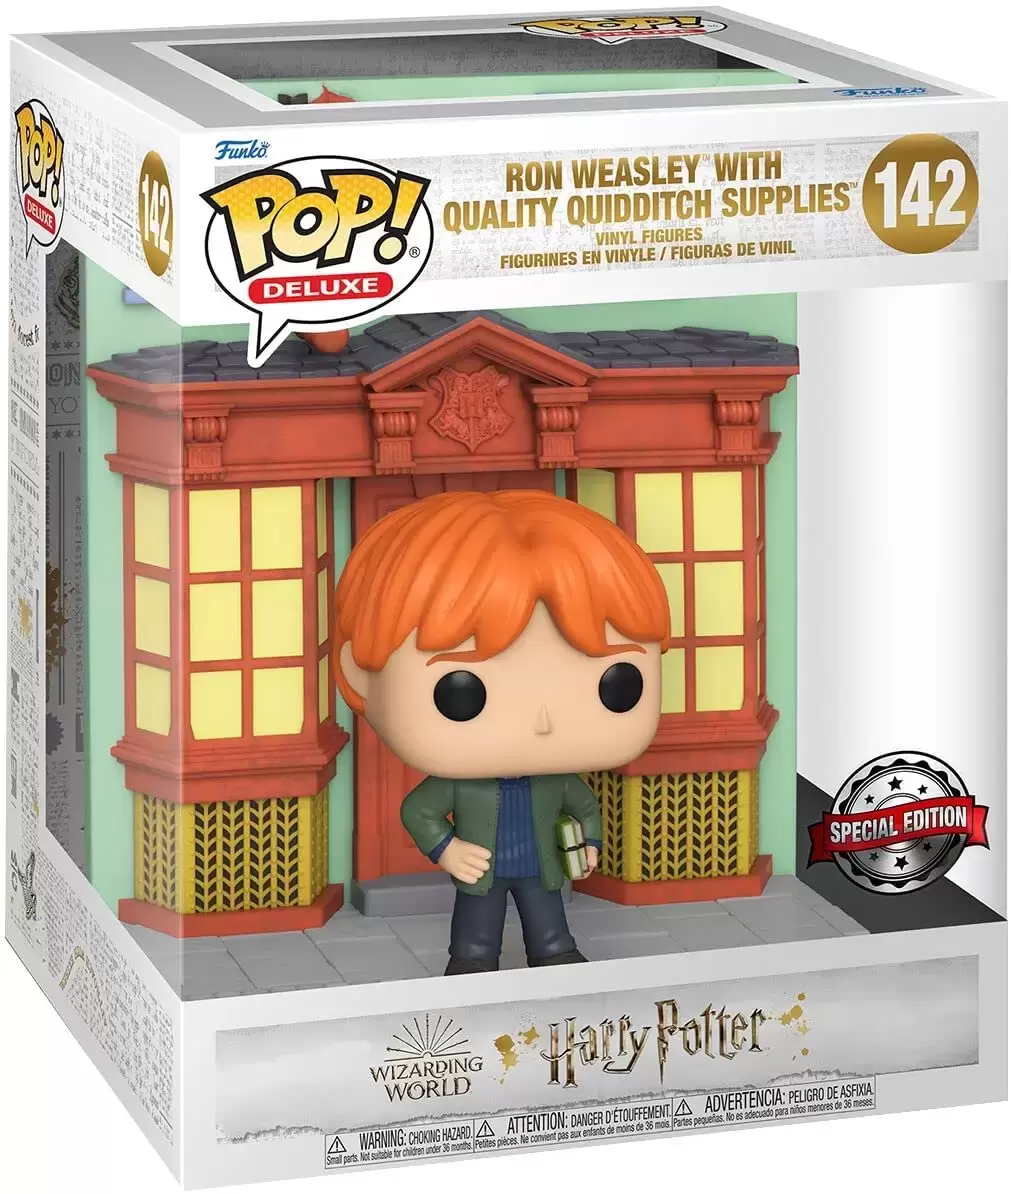 Ron Weasley with Quality Supplies - Harry action figure 142